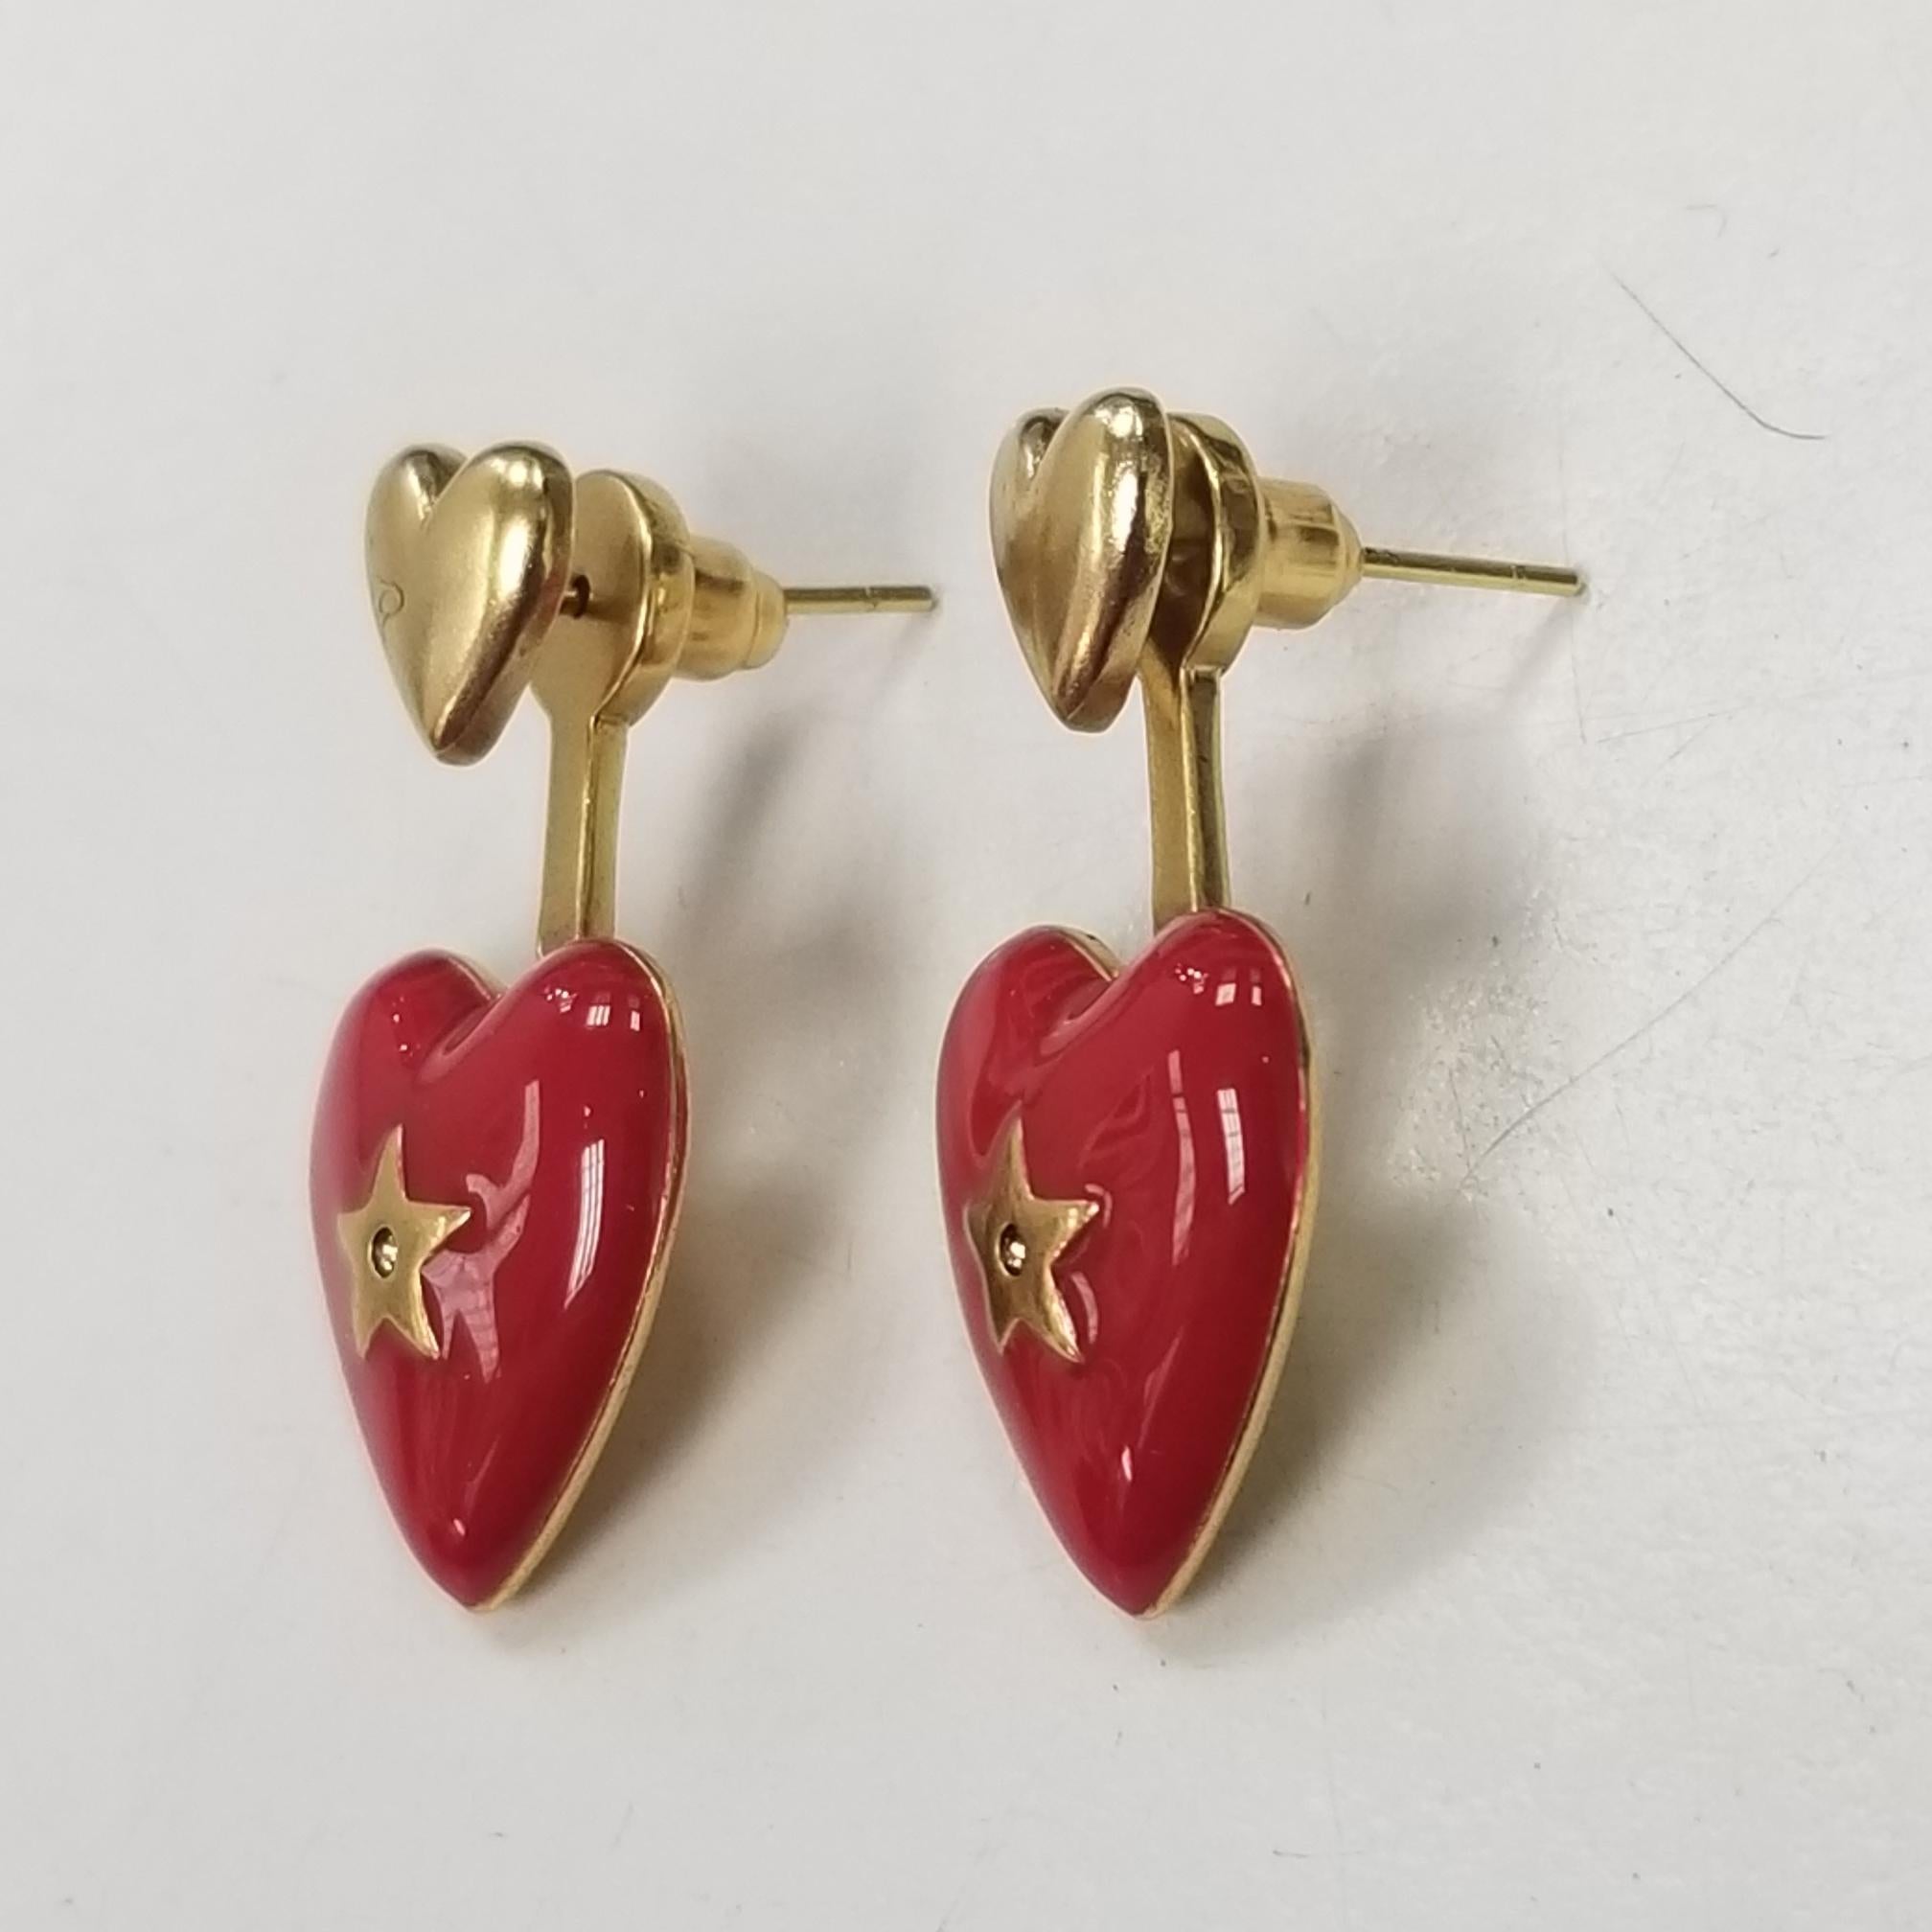 Beautiful Dioramour Brass Gold Red Heart earrings.  Good condition with minor scratches. Clutch back closure.
Drop: 1.25